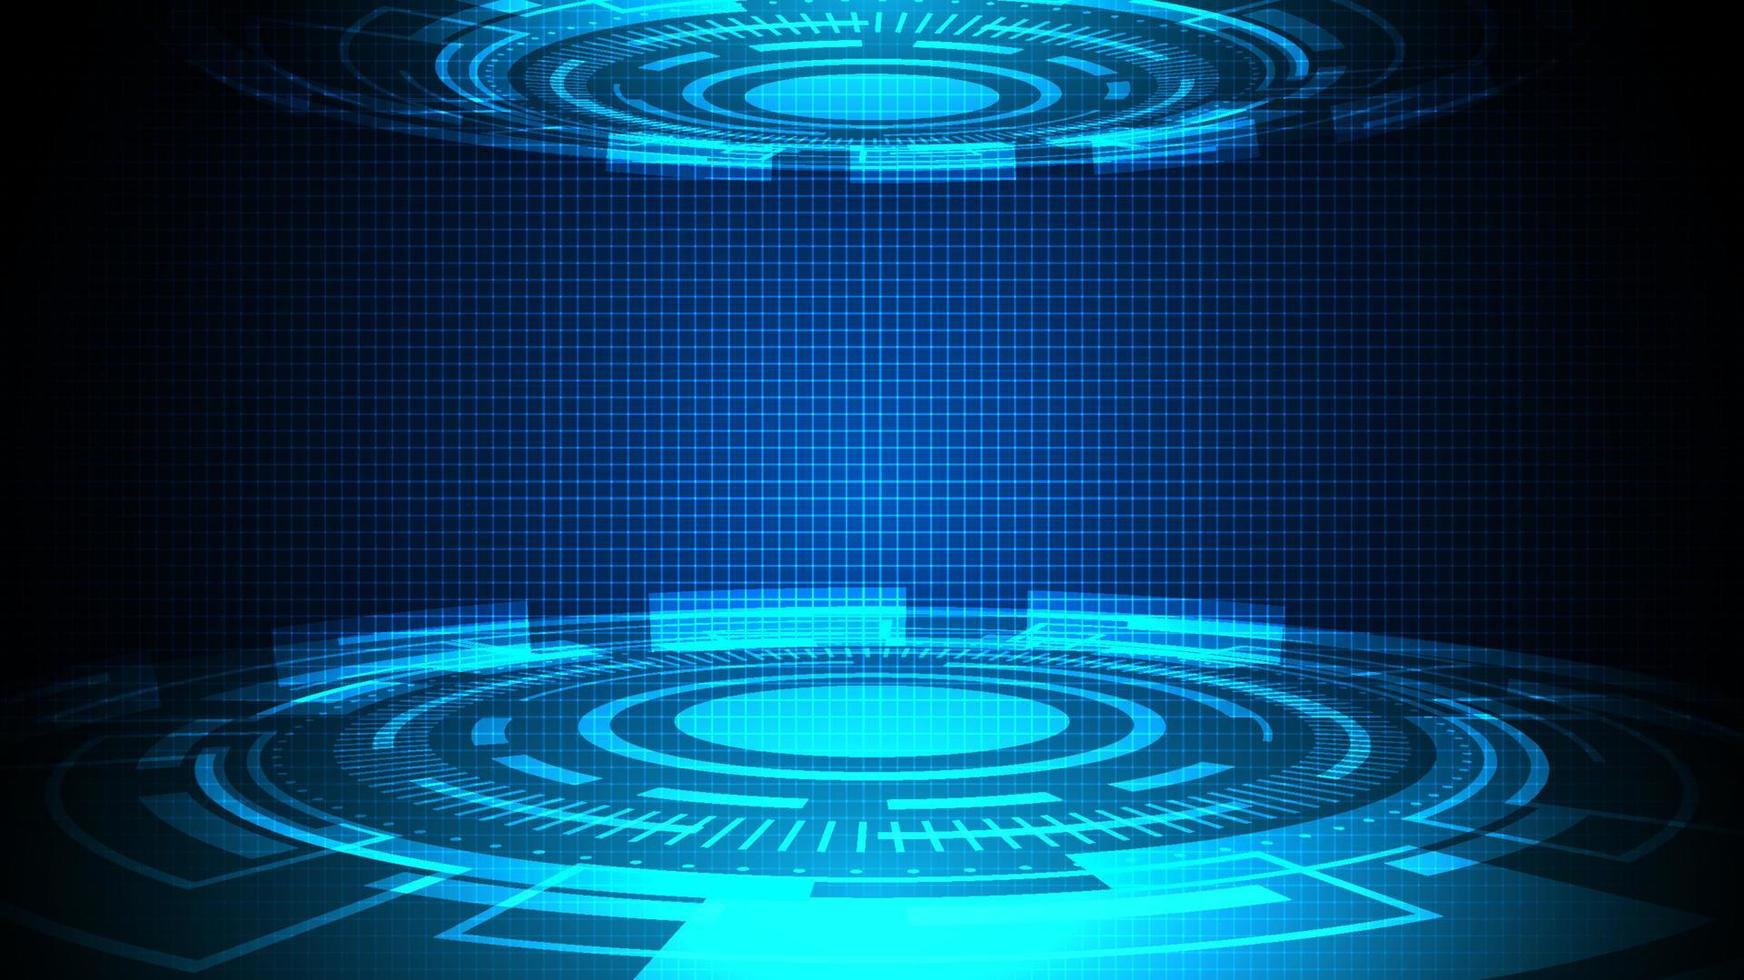 Abstract technology futuristic concept circle hud interface screen design on dark blue background vector